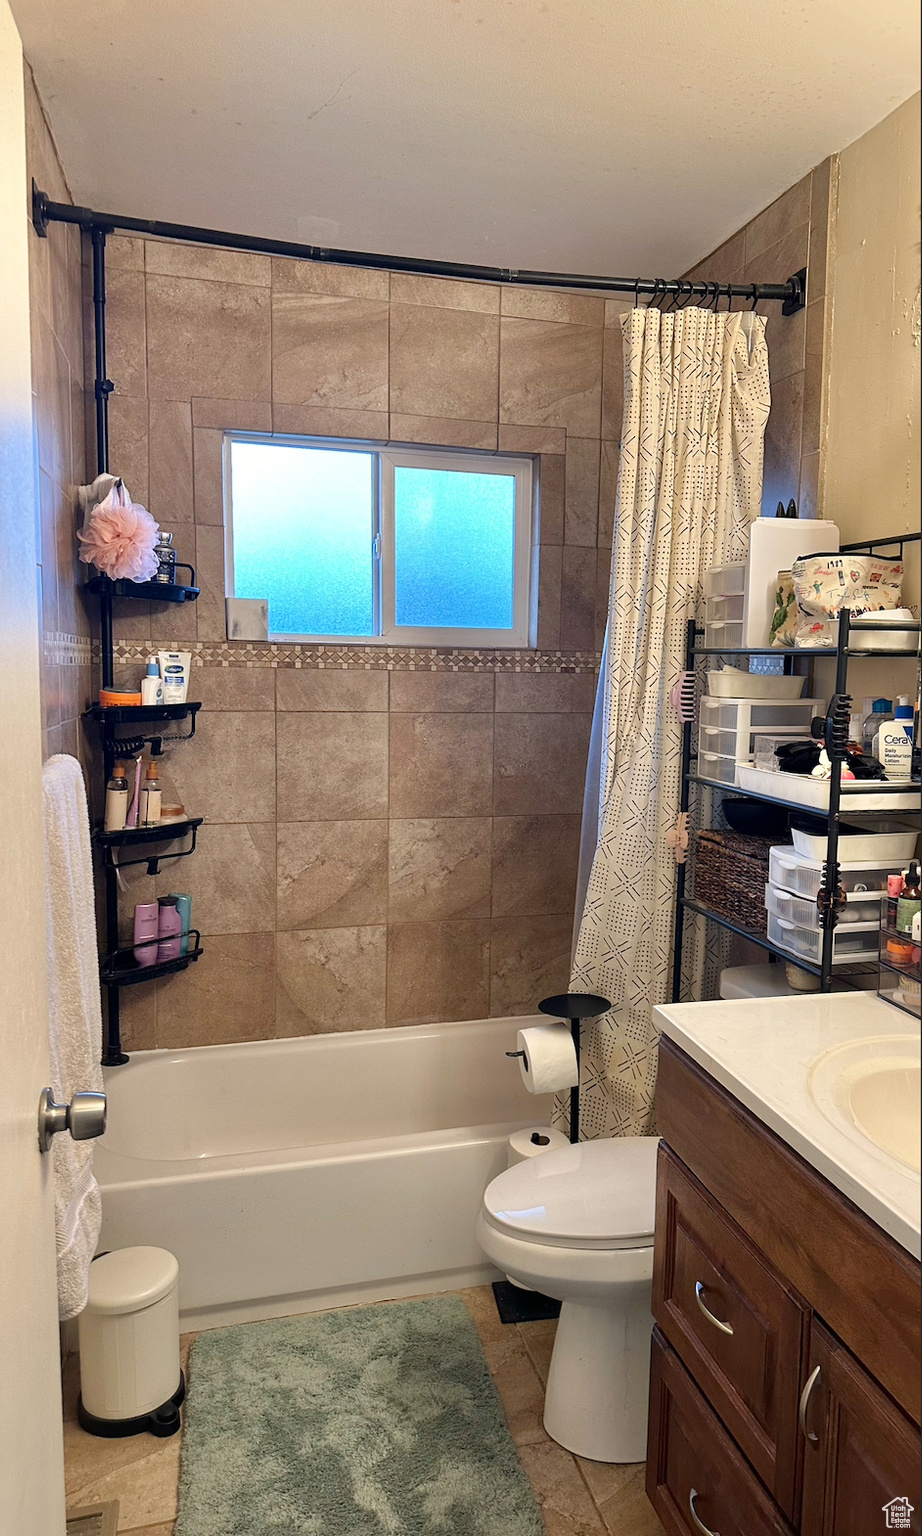 Full bathroom featuring toilet, vanity, tile floors, shower / bath combo with shower curtain, and plenty of natural light